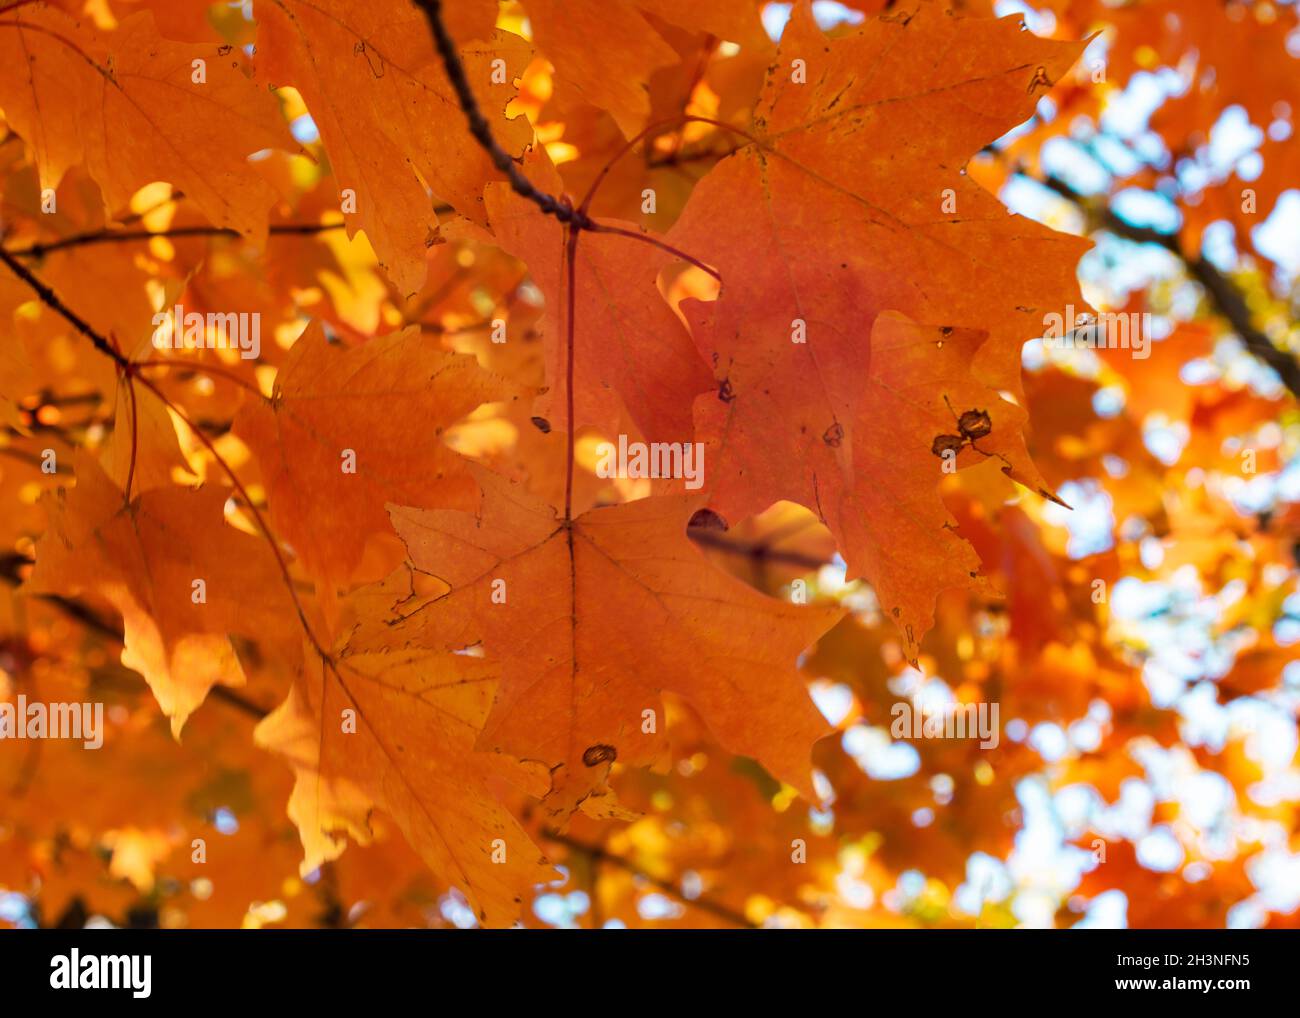 Reds, oranges, and golds of maple tree leaves on an autunm day. Stock Photo